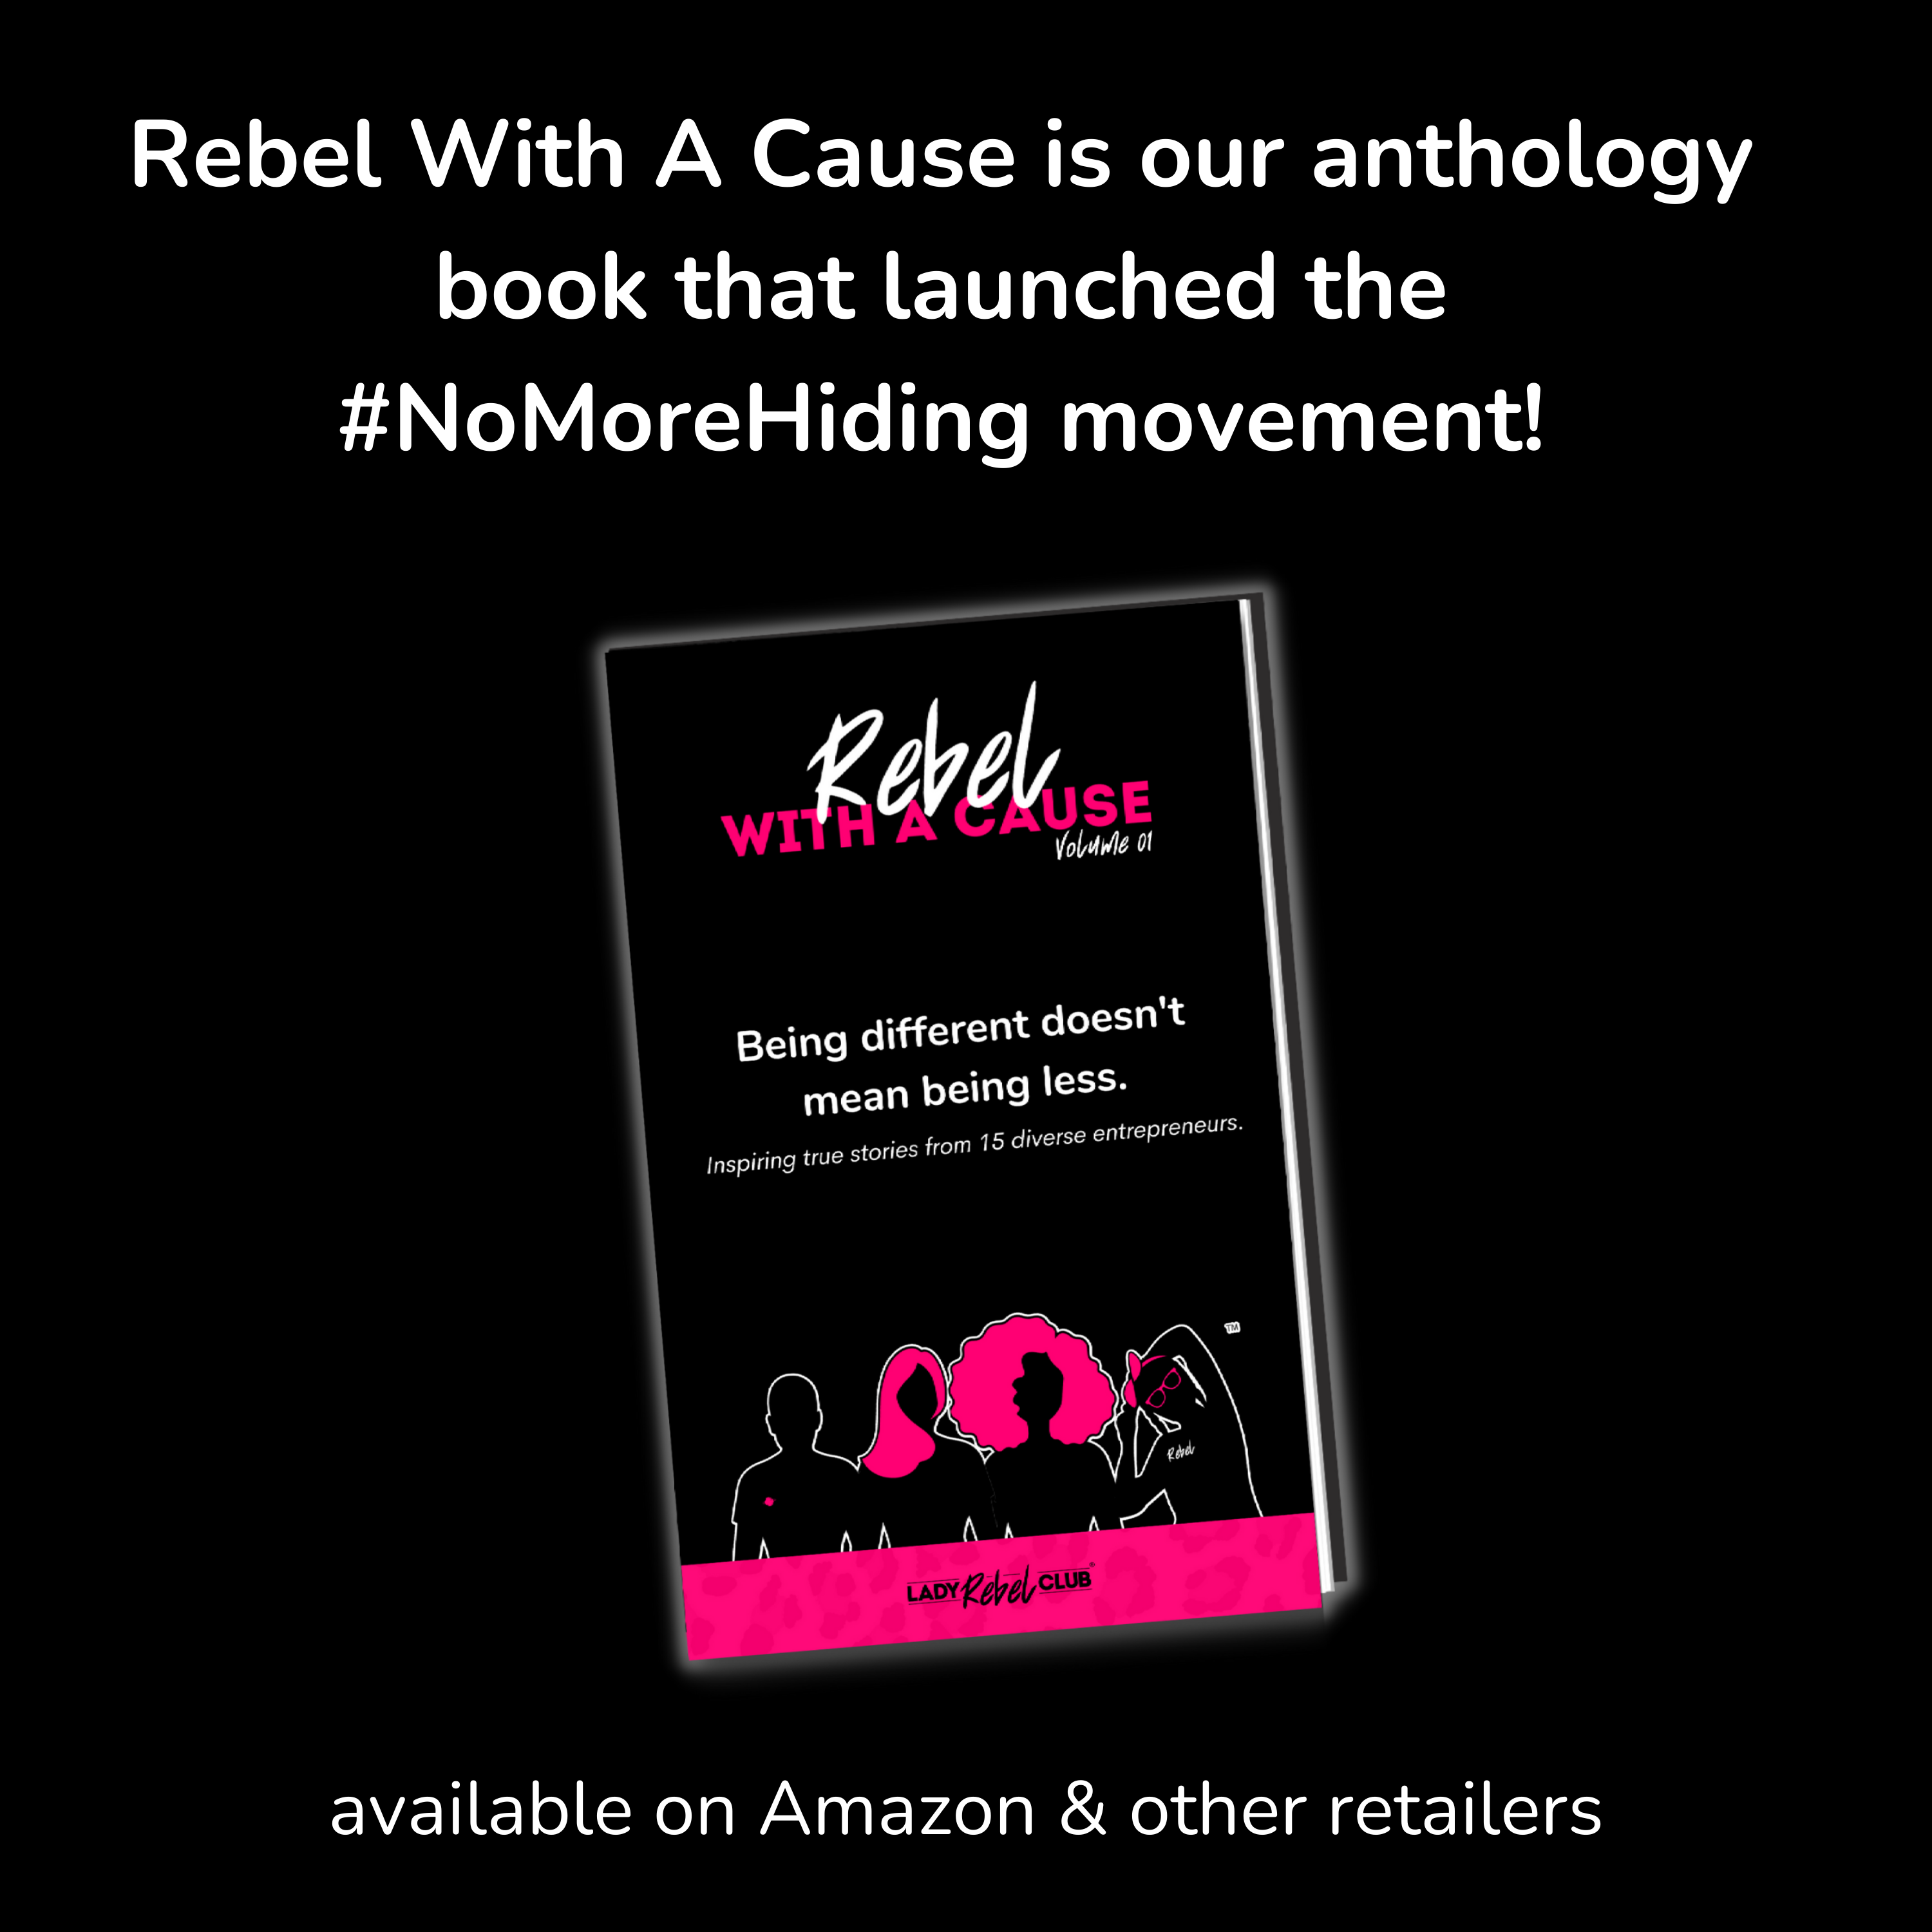 graphic of a book, black cover, Rebel With A Cause logo in white and hot pink at top, cover reads: Being different doesn't make us less. Lady Rebel Club. Graphic women on cover. Text above book in white reads: Our book that launched the #NoMoreHiding movement